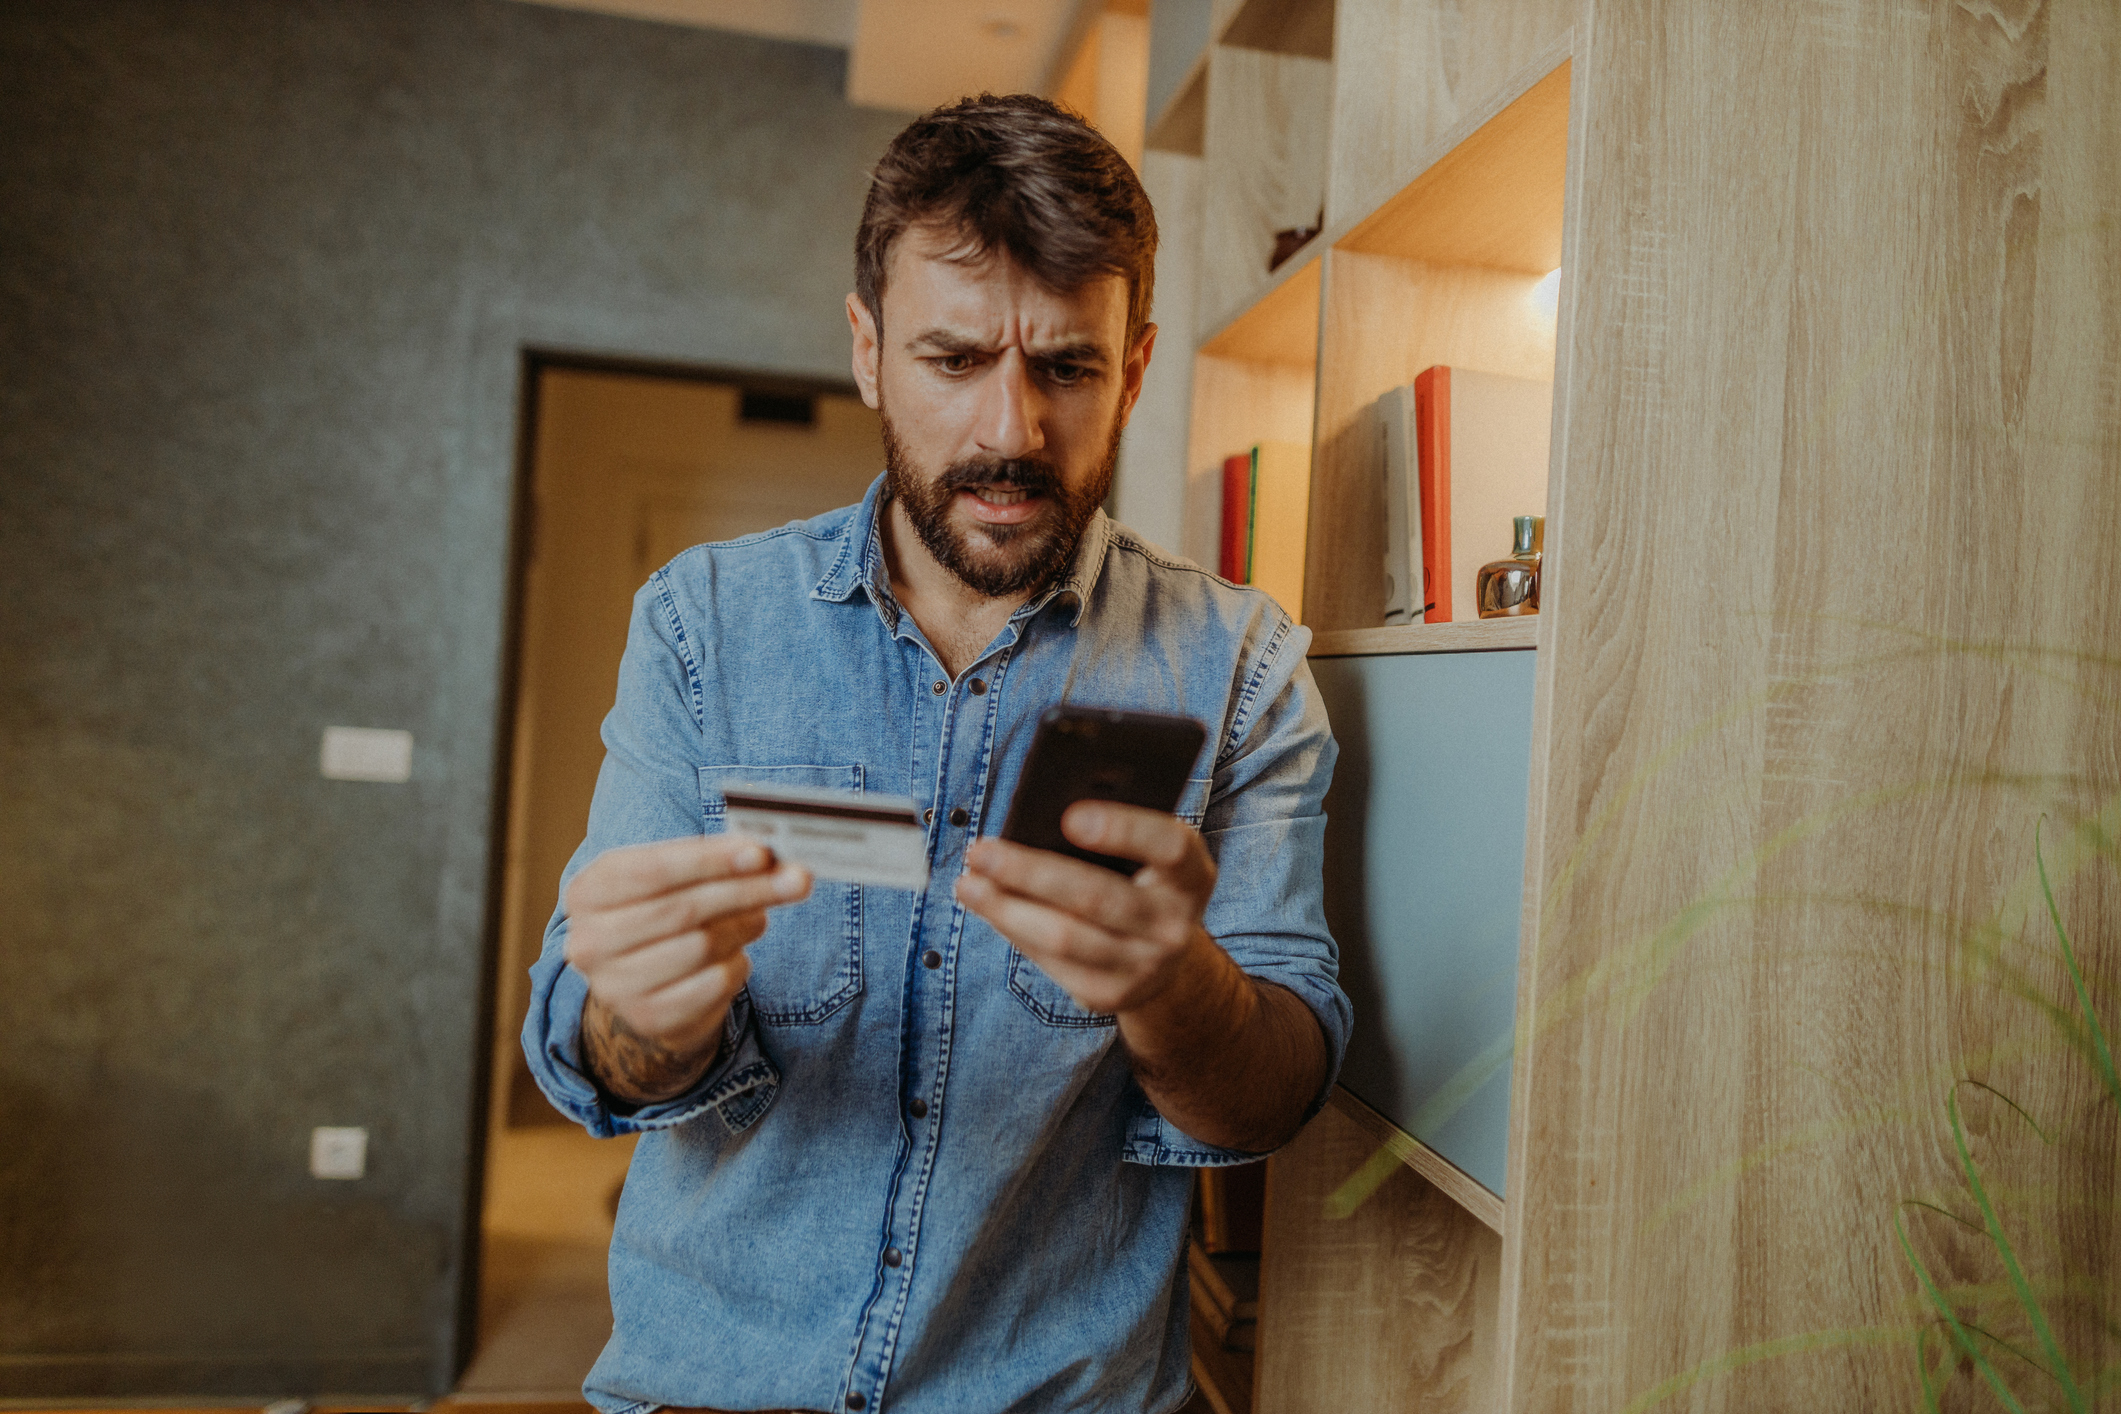 man worried about debt on cell phone with credit card